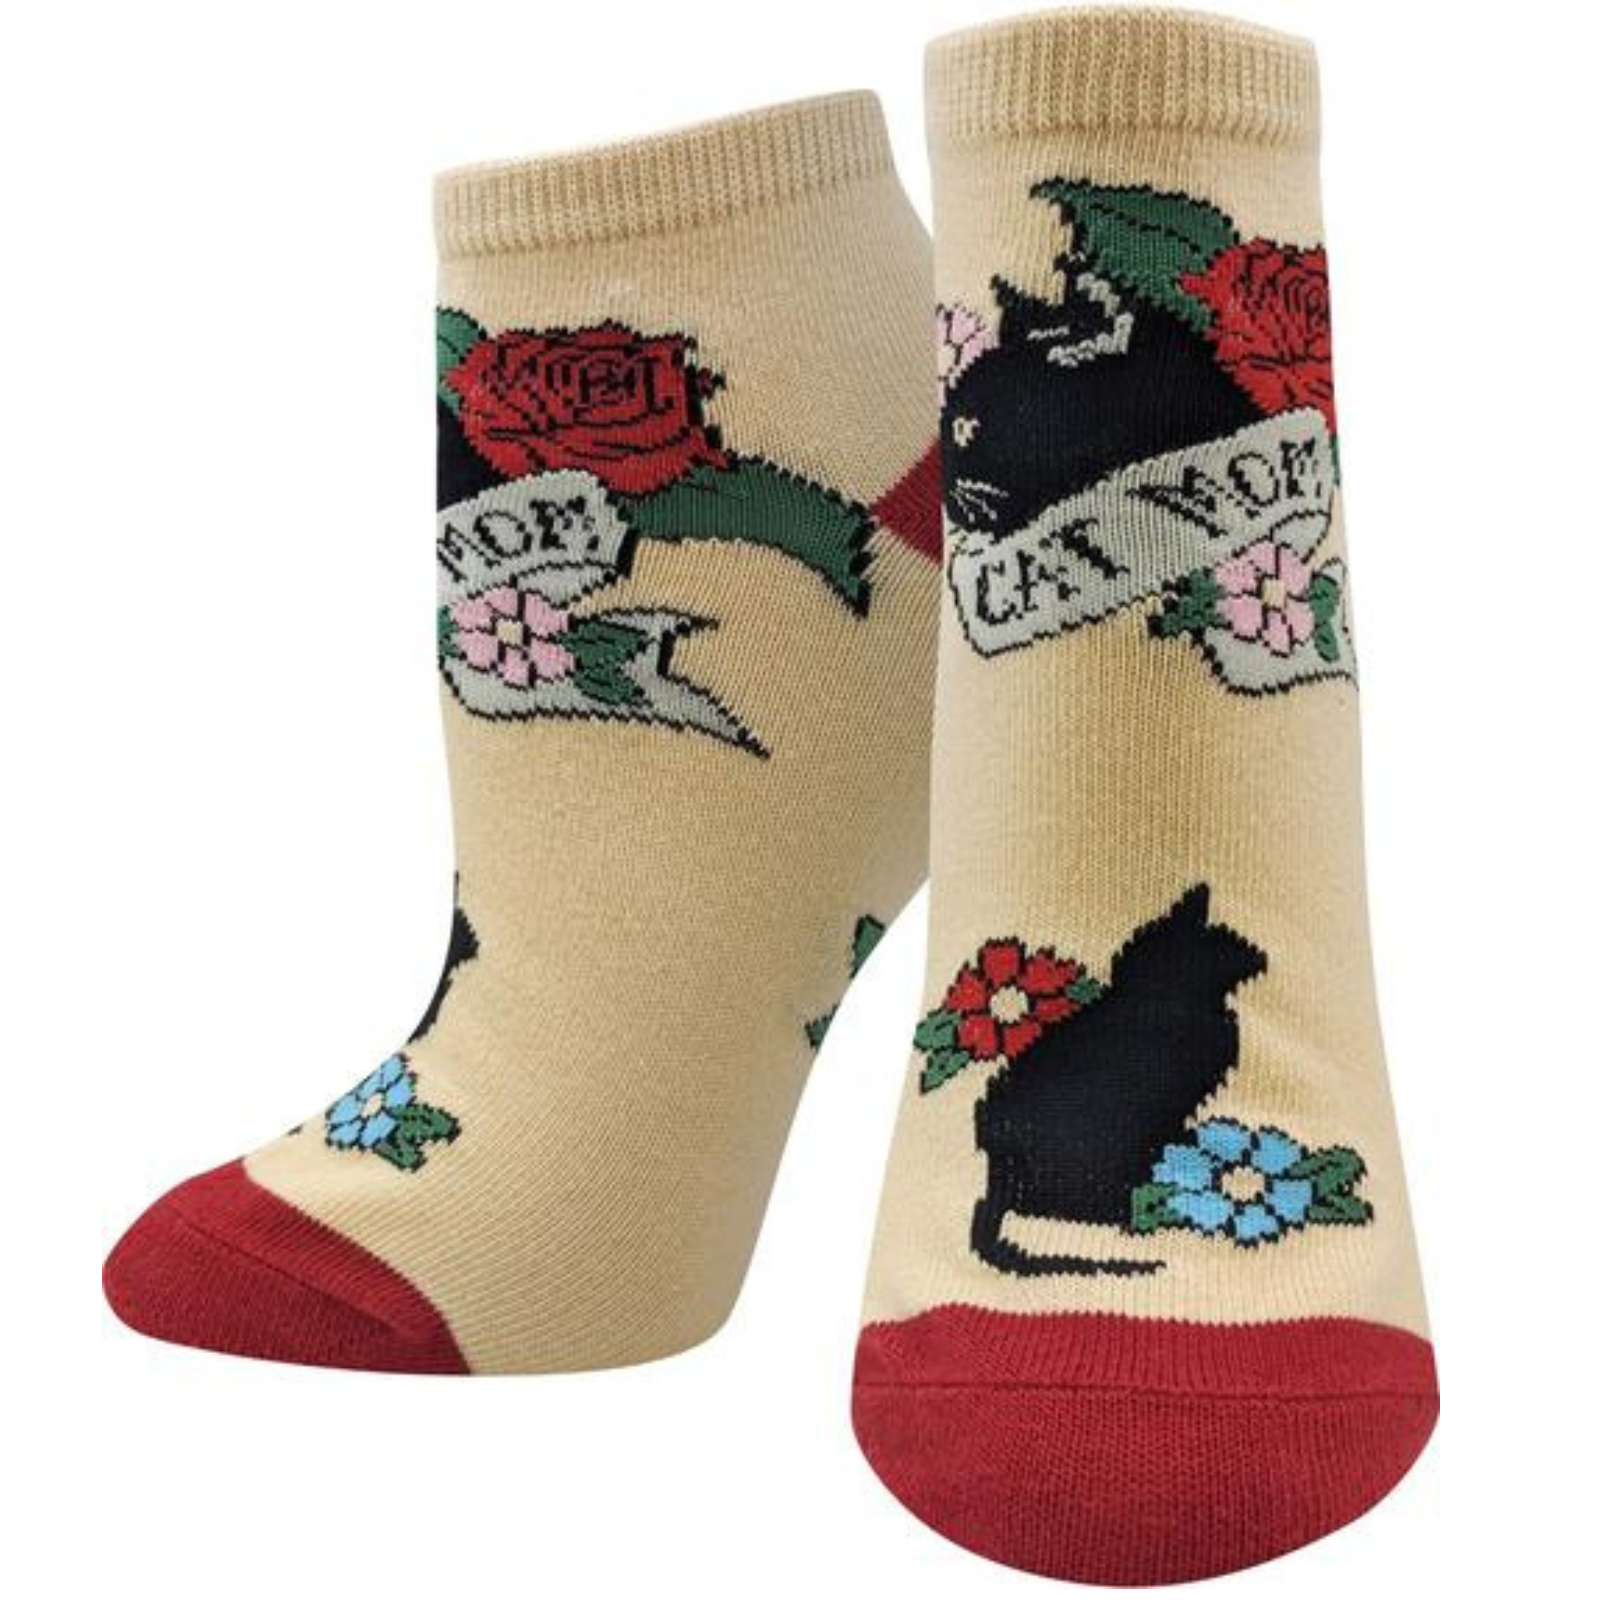 Sock Harbor Cat Mom women's ankle sock featuring beige sock with red toes and black cat with flowers and "Cat Mom" banner on display feet